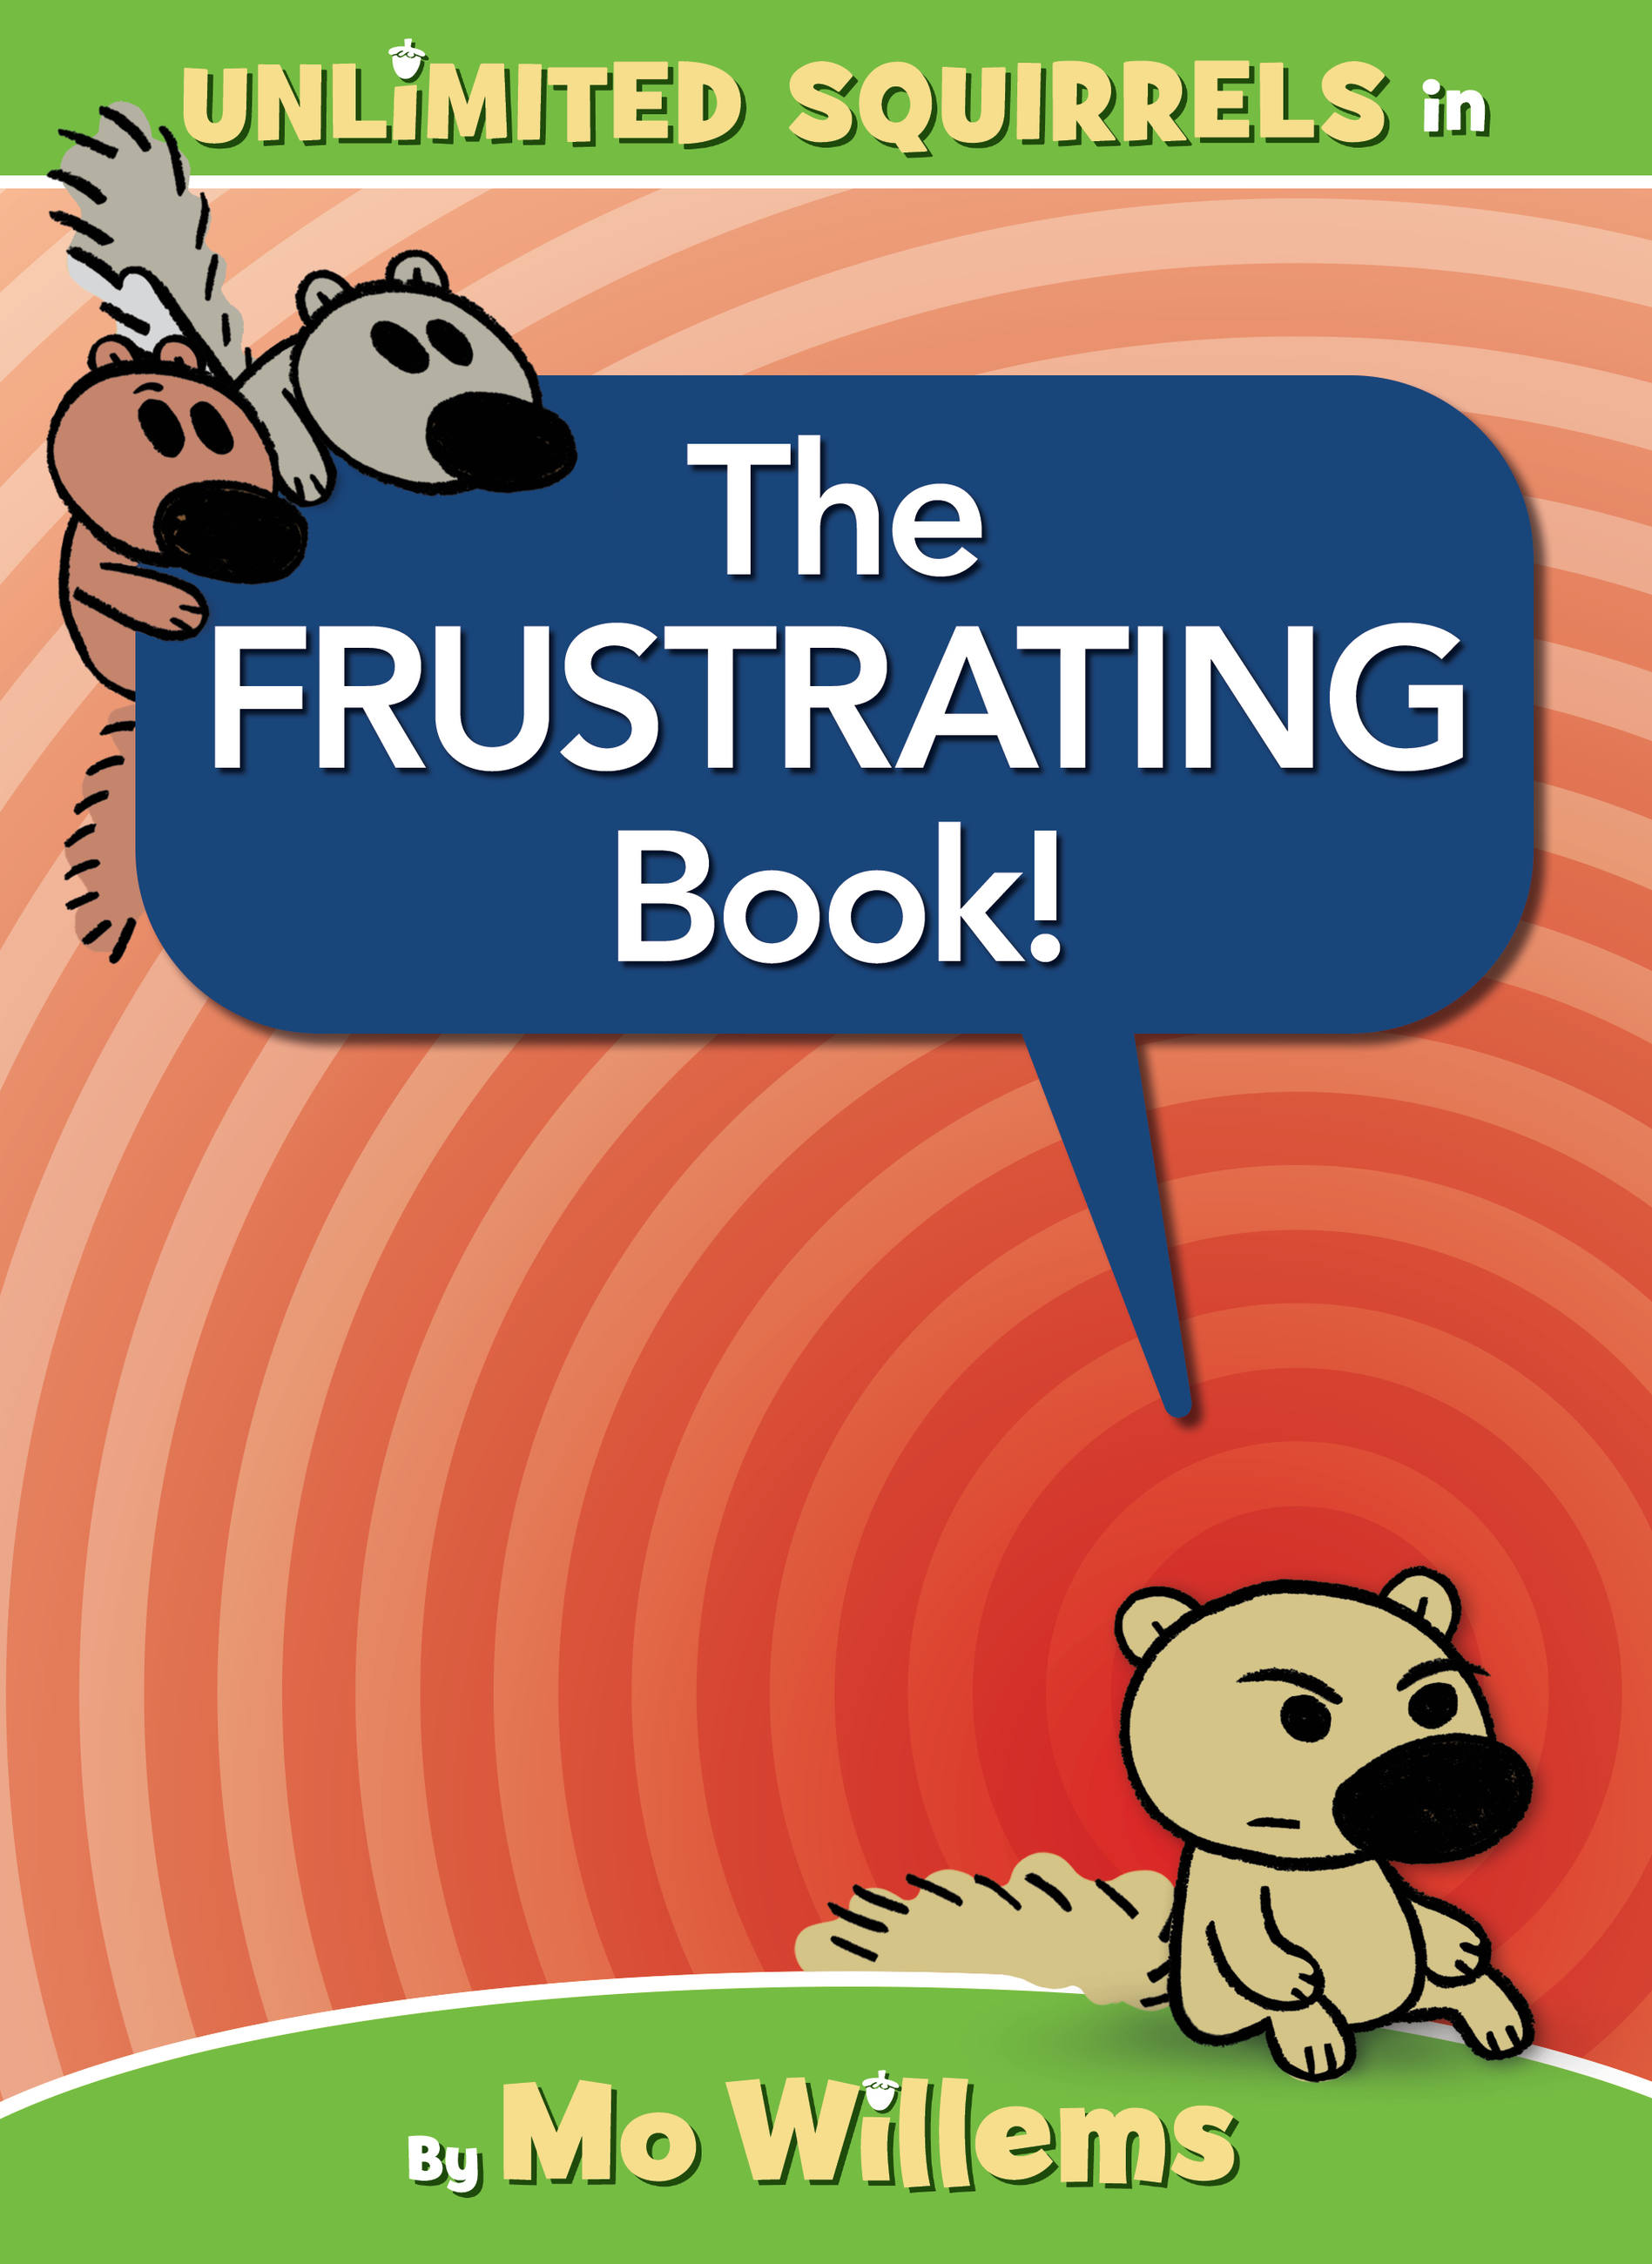 The FRUSTRATING Book! (An Unlimited Squirrels Book) | Picture & board books